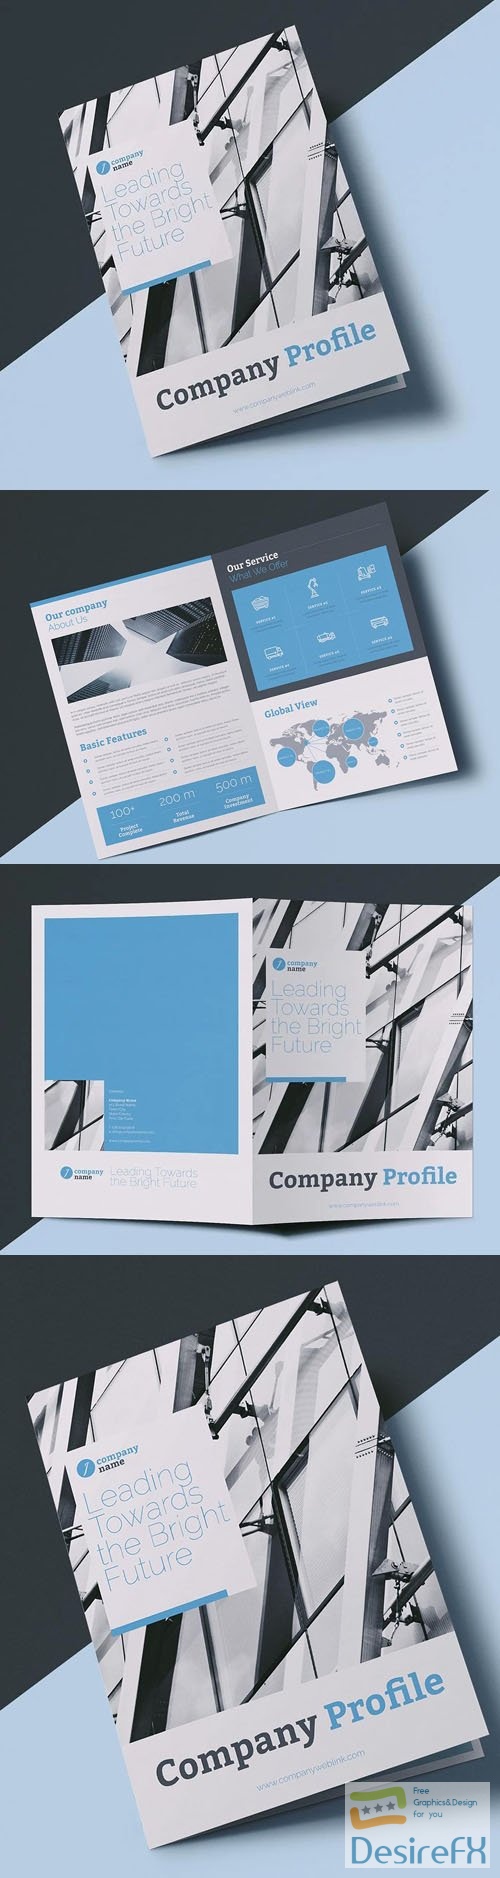 Company Profile InDesign INDD/IDML Brochure Template 4-Pages